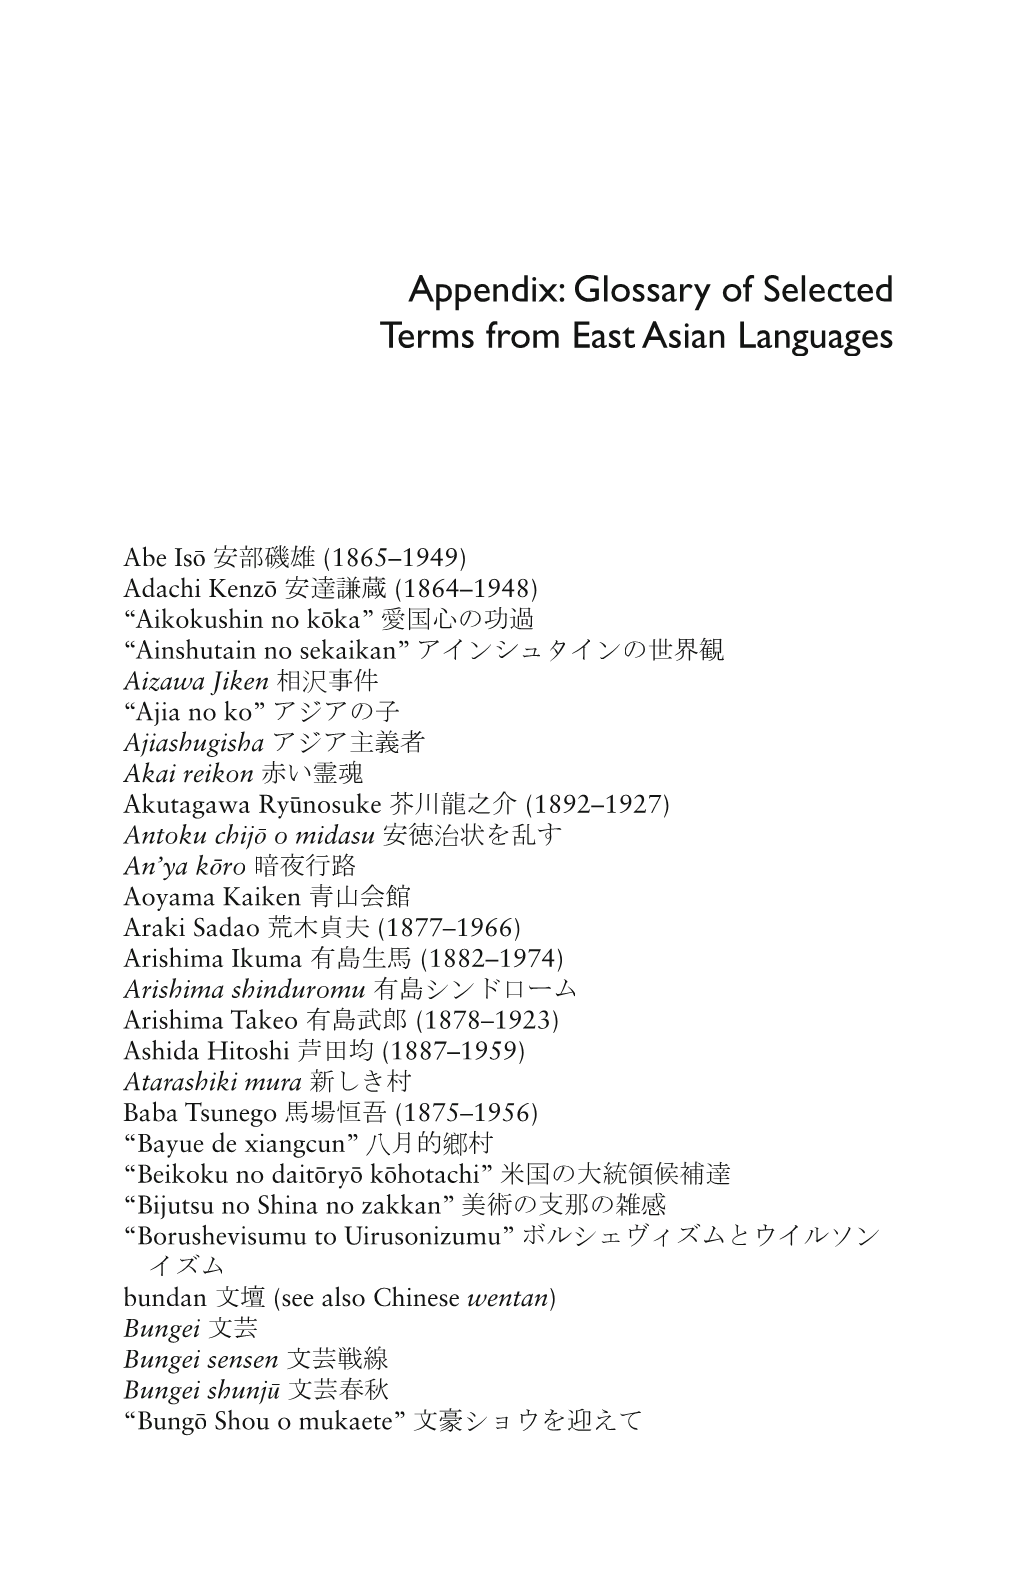 Appendix: Glossary of Selected Terms from East Asian Languages